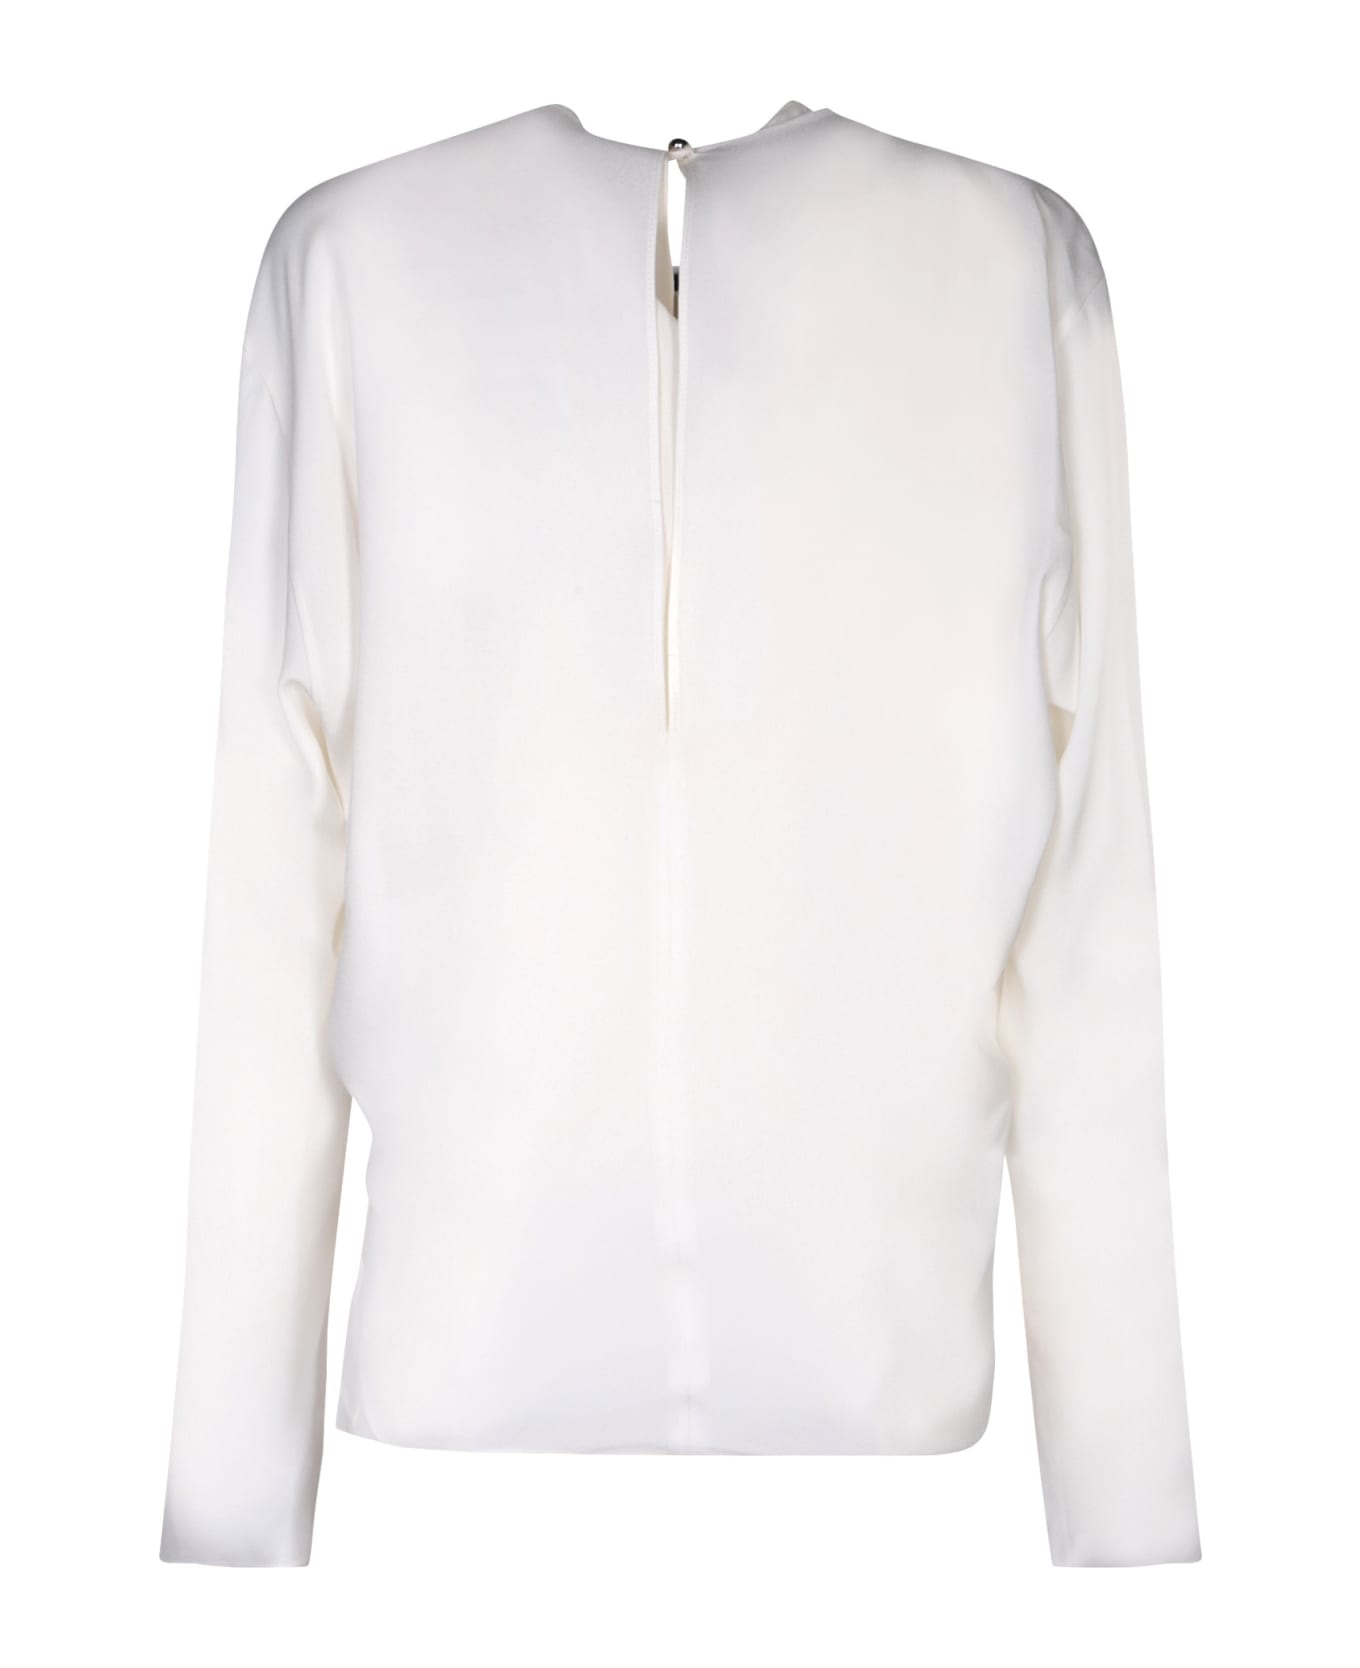 Paco Rabanne White Crepe Blouse With Detail - White